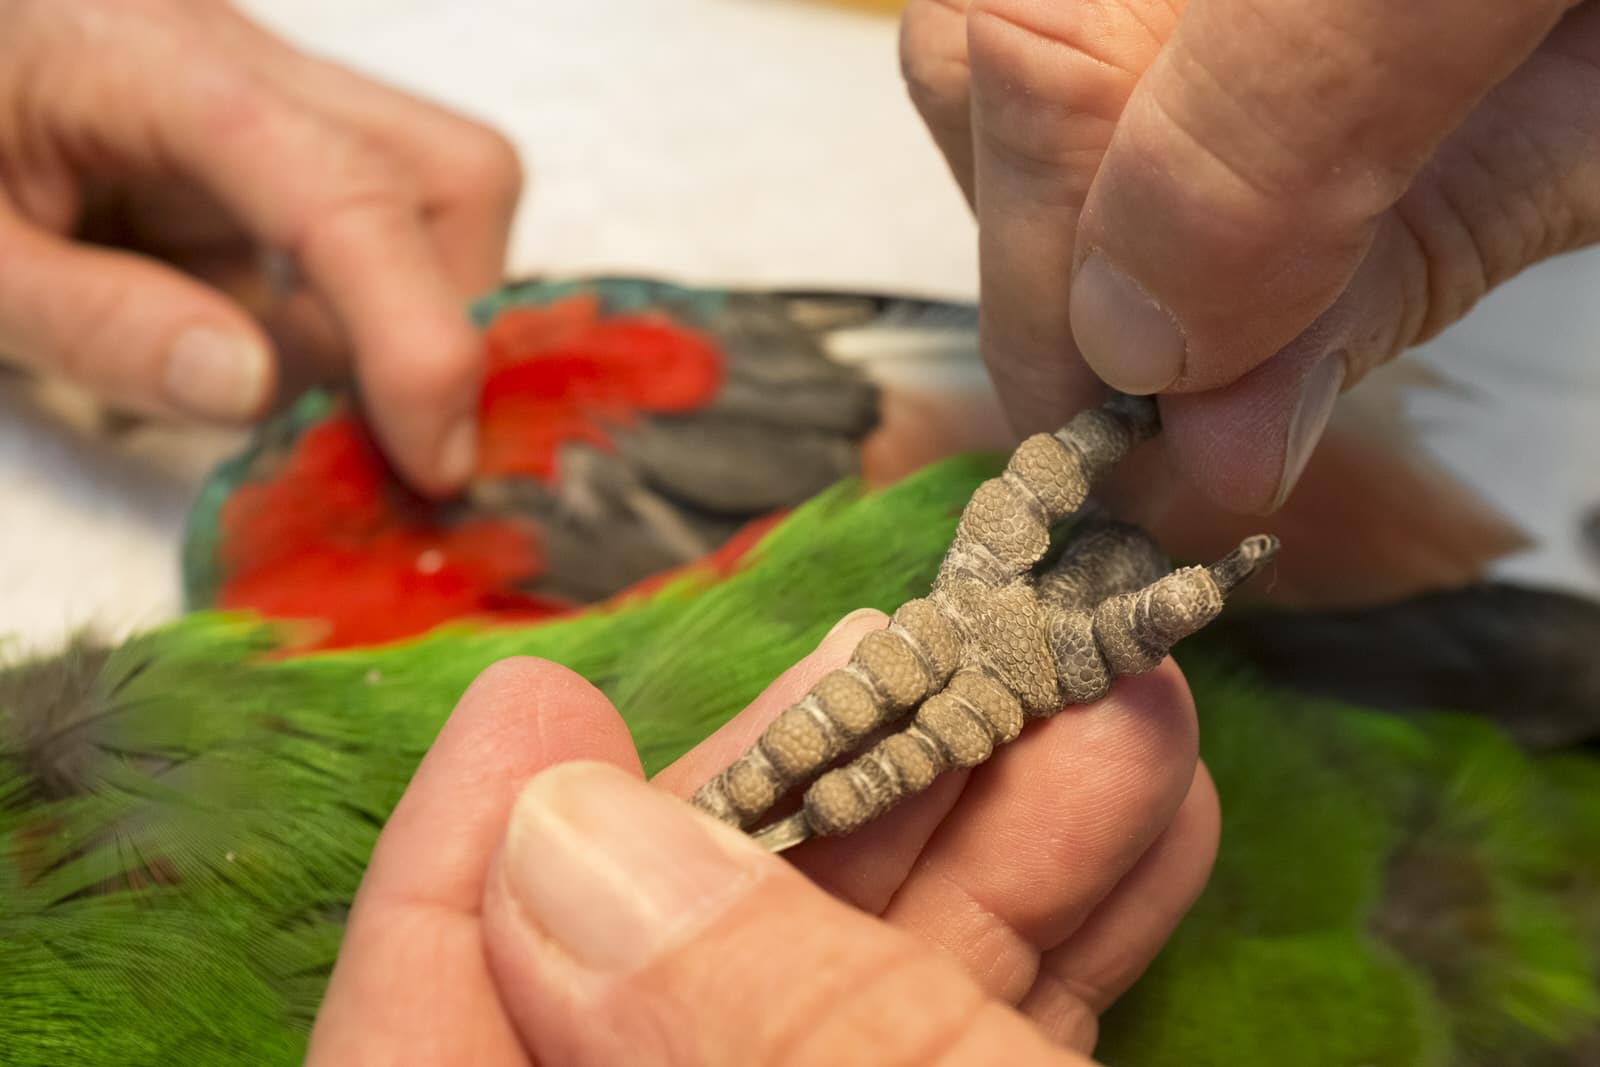 Parrot Nails – When and How to Groom, Clip, or Trim Bird Nails